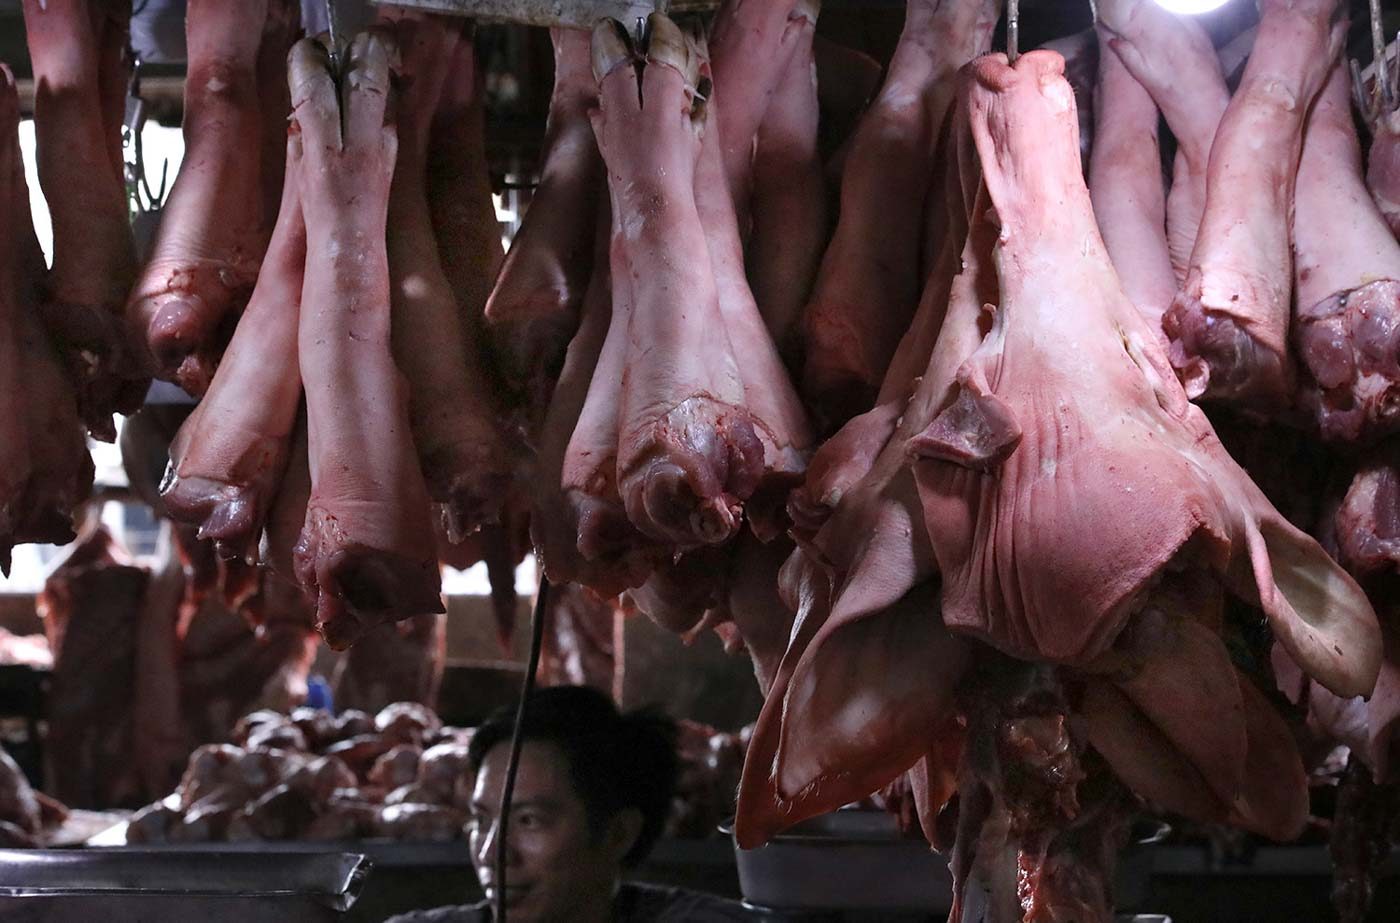 Cebu province tells hotels, restos to dump pork products from Luzon